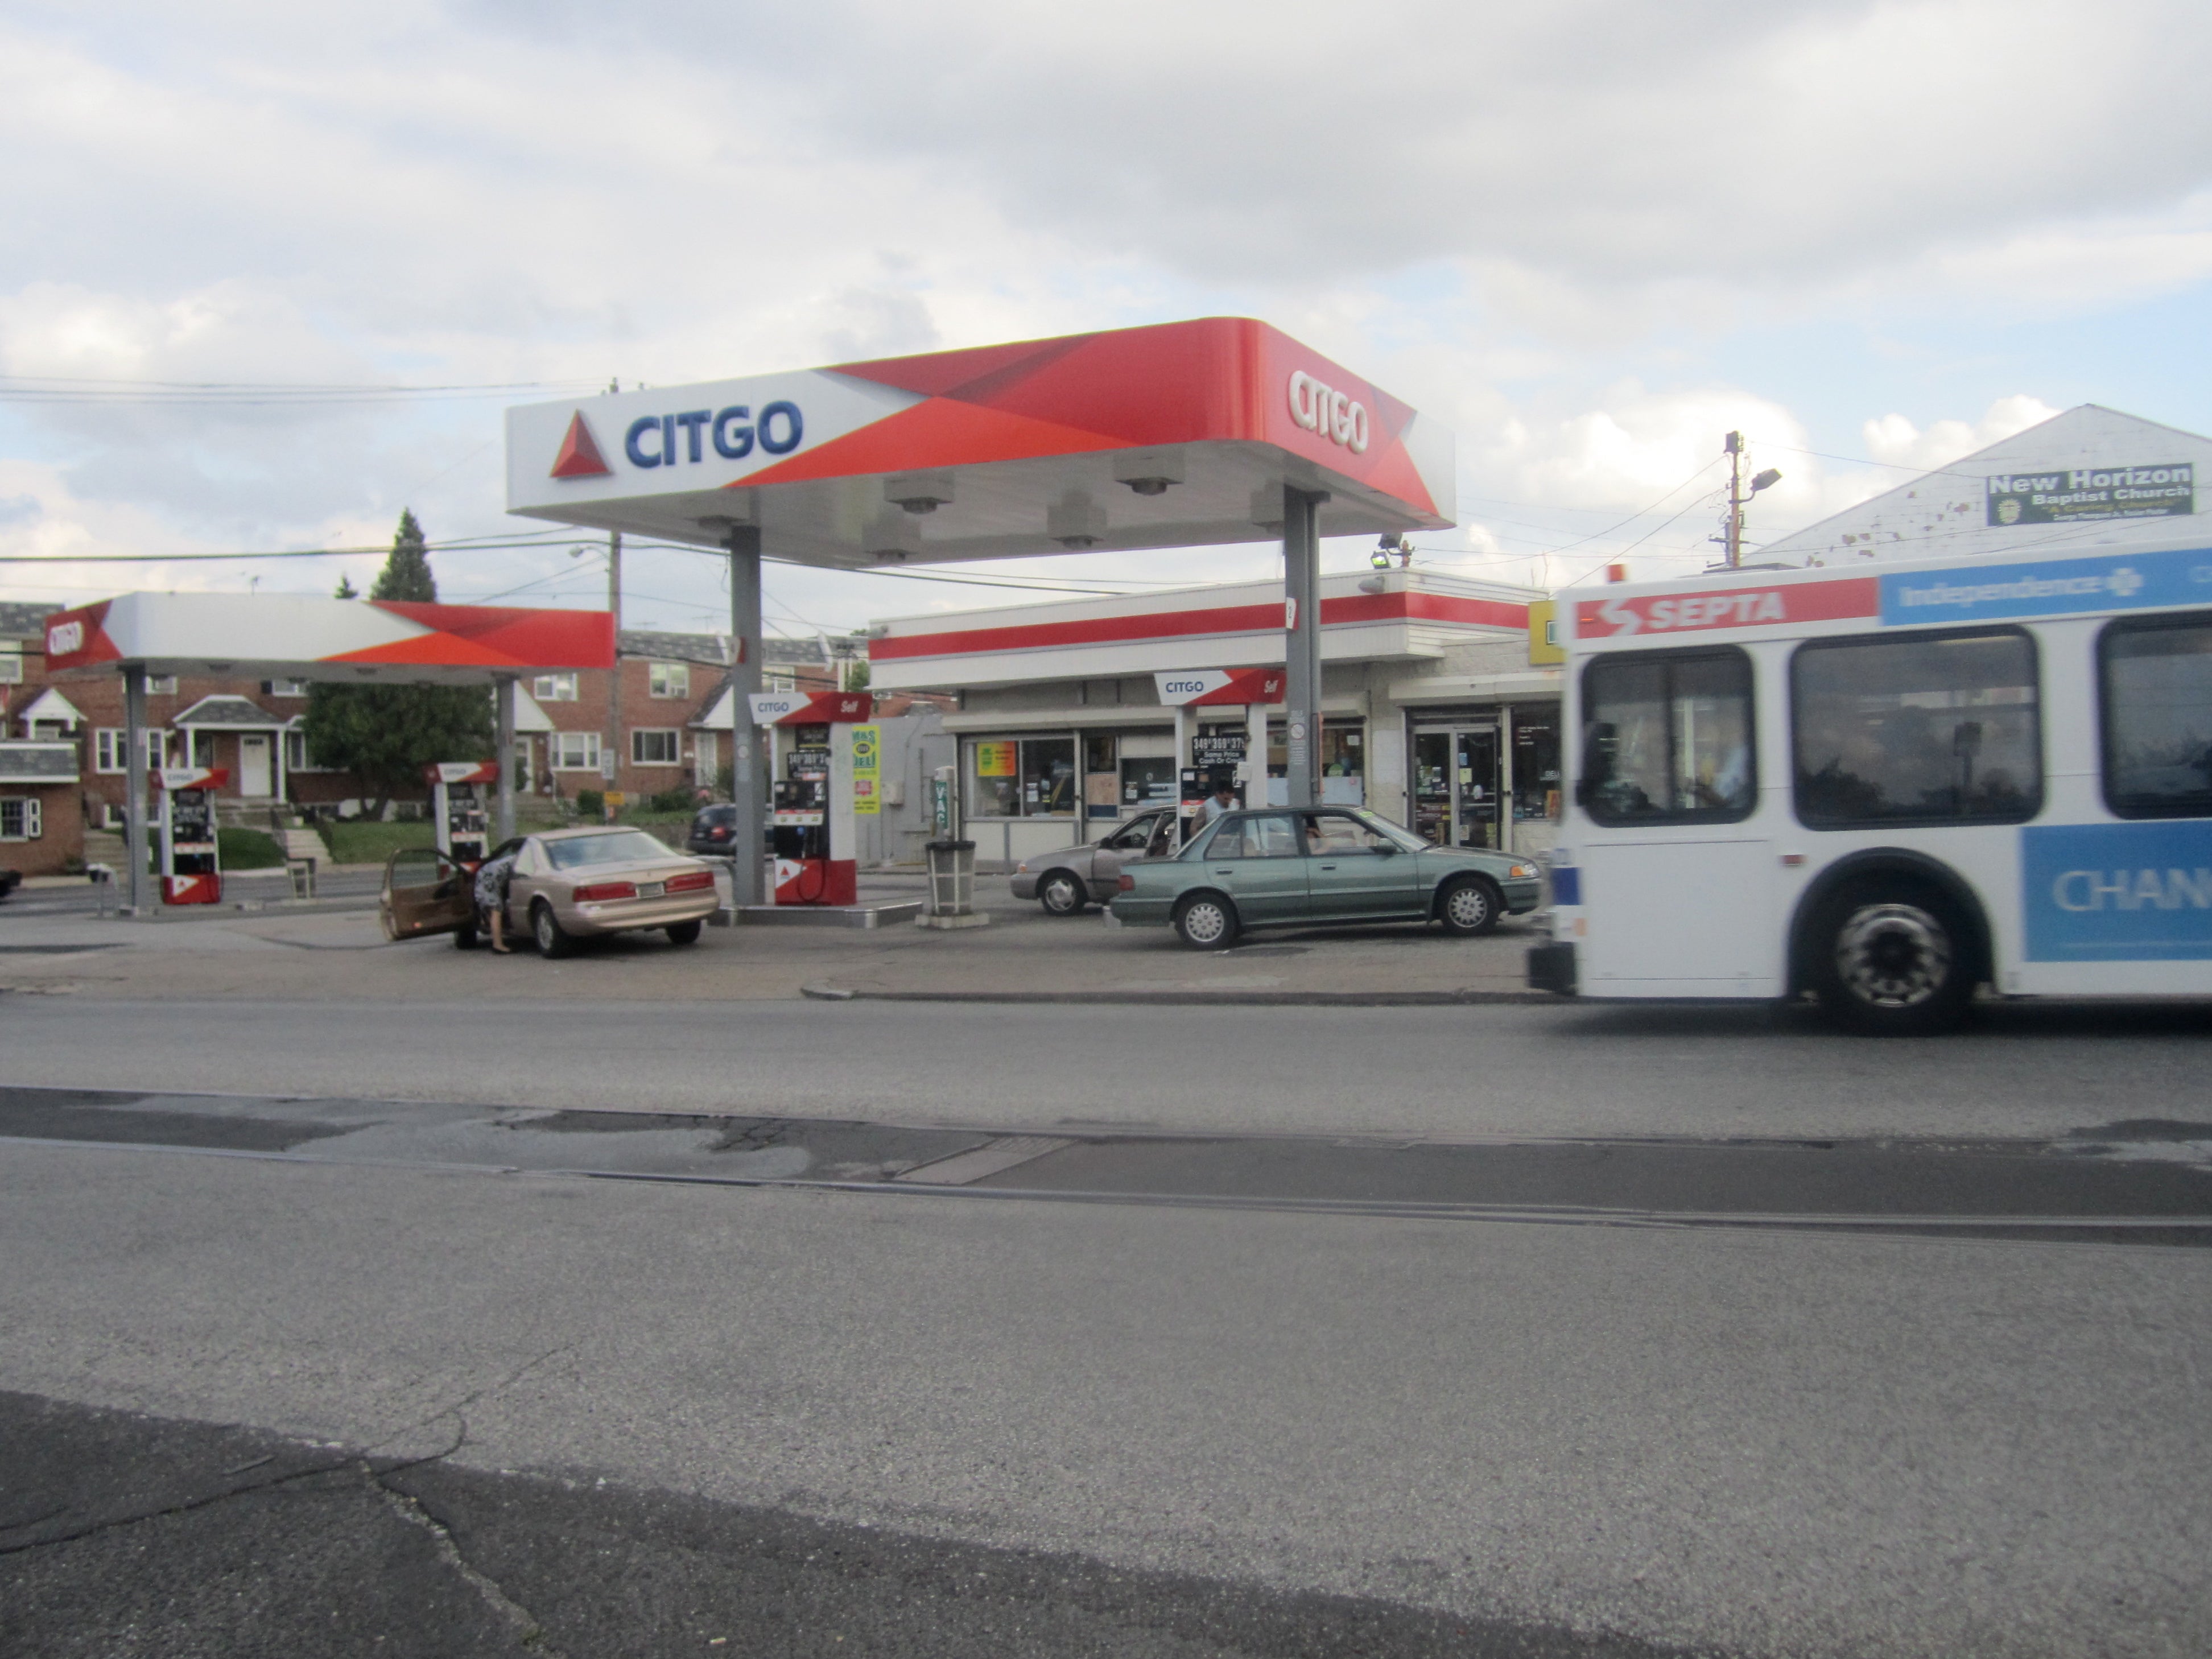 The project will reduce access and confusion at the Citgo station on Olney Ave.